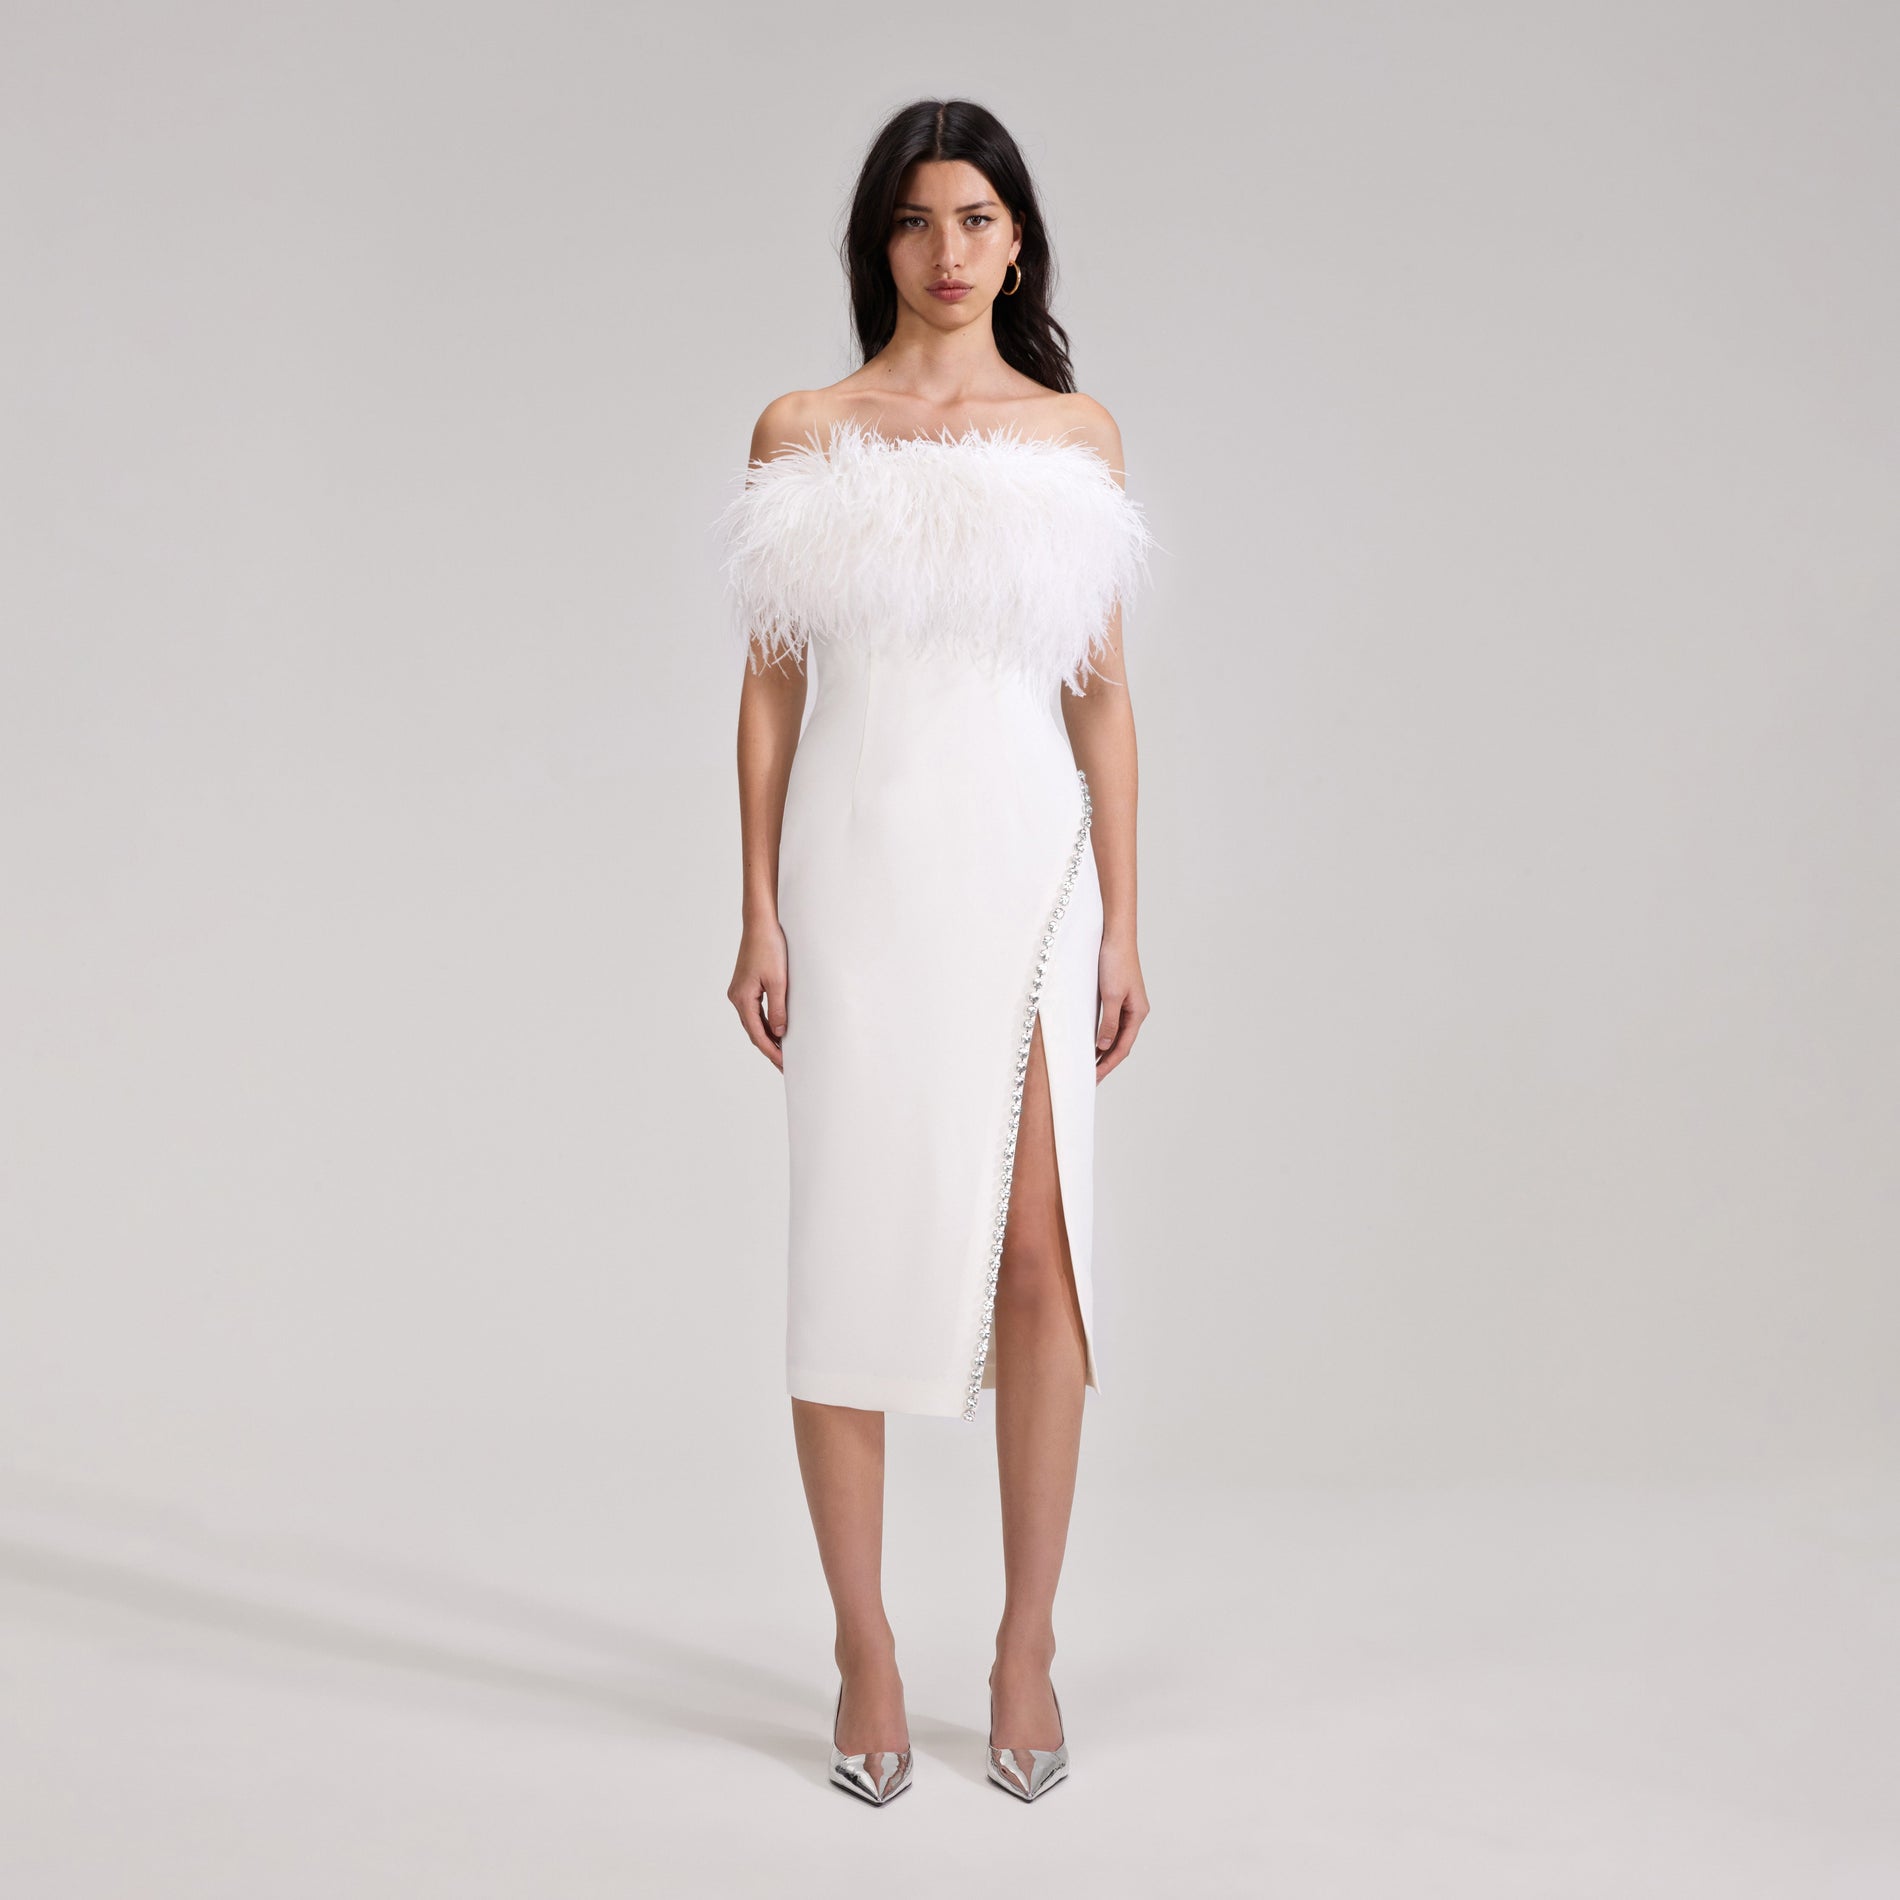 A woman wearing the White Feather Midi Dress